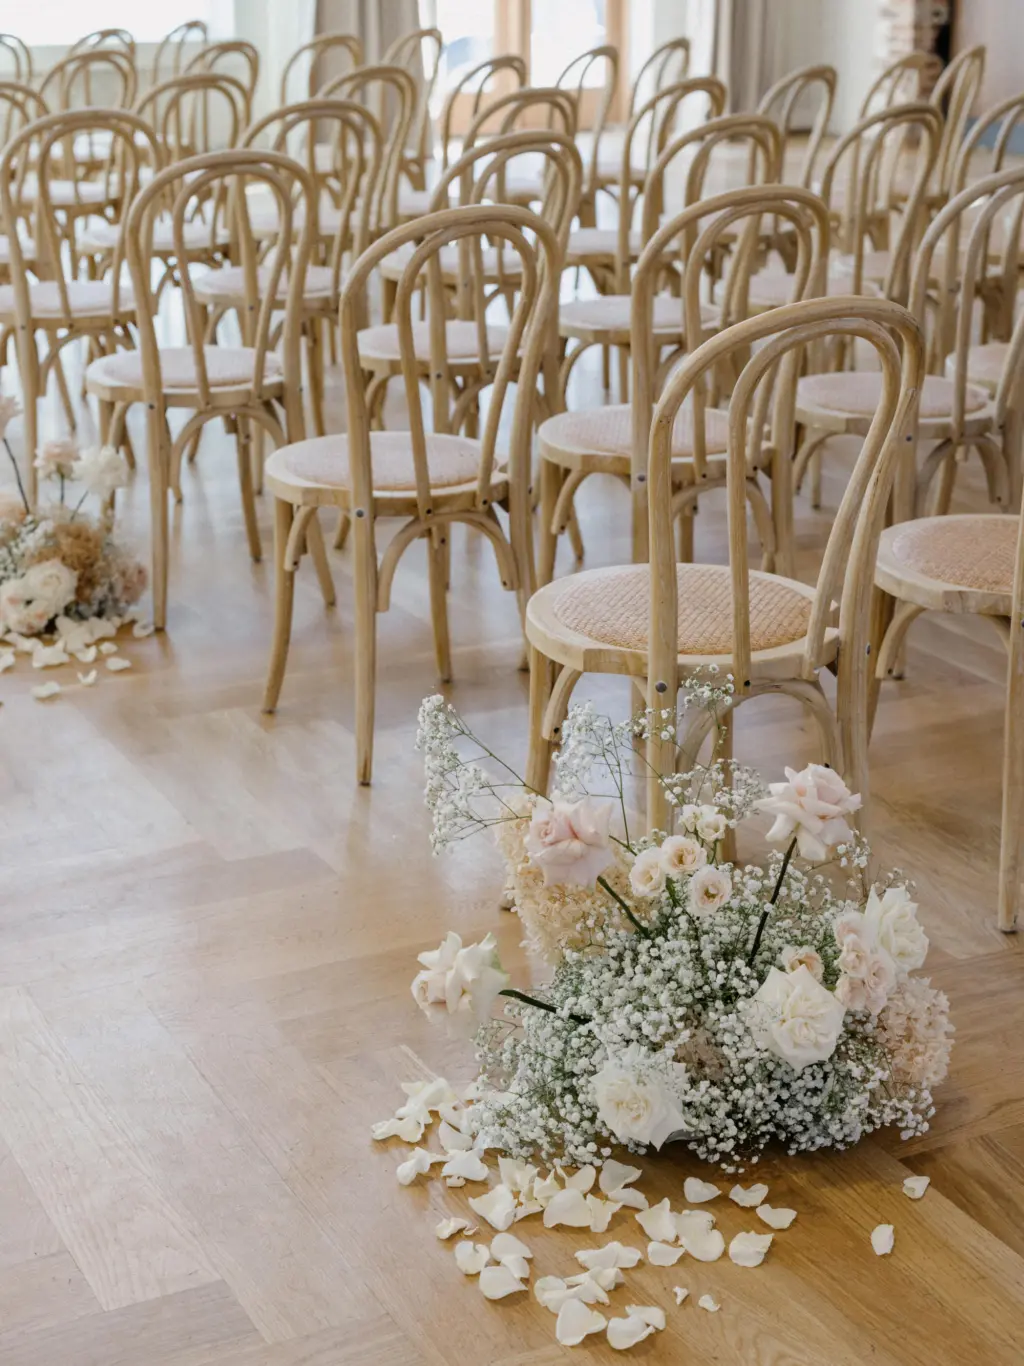 Baby's Breath, Pink Roses, and Cream Hydrangeas Aisle Floral Arrangement Wedding Ceremony Inspiration